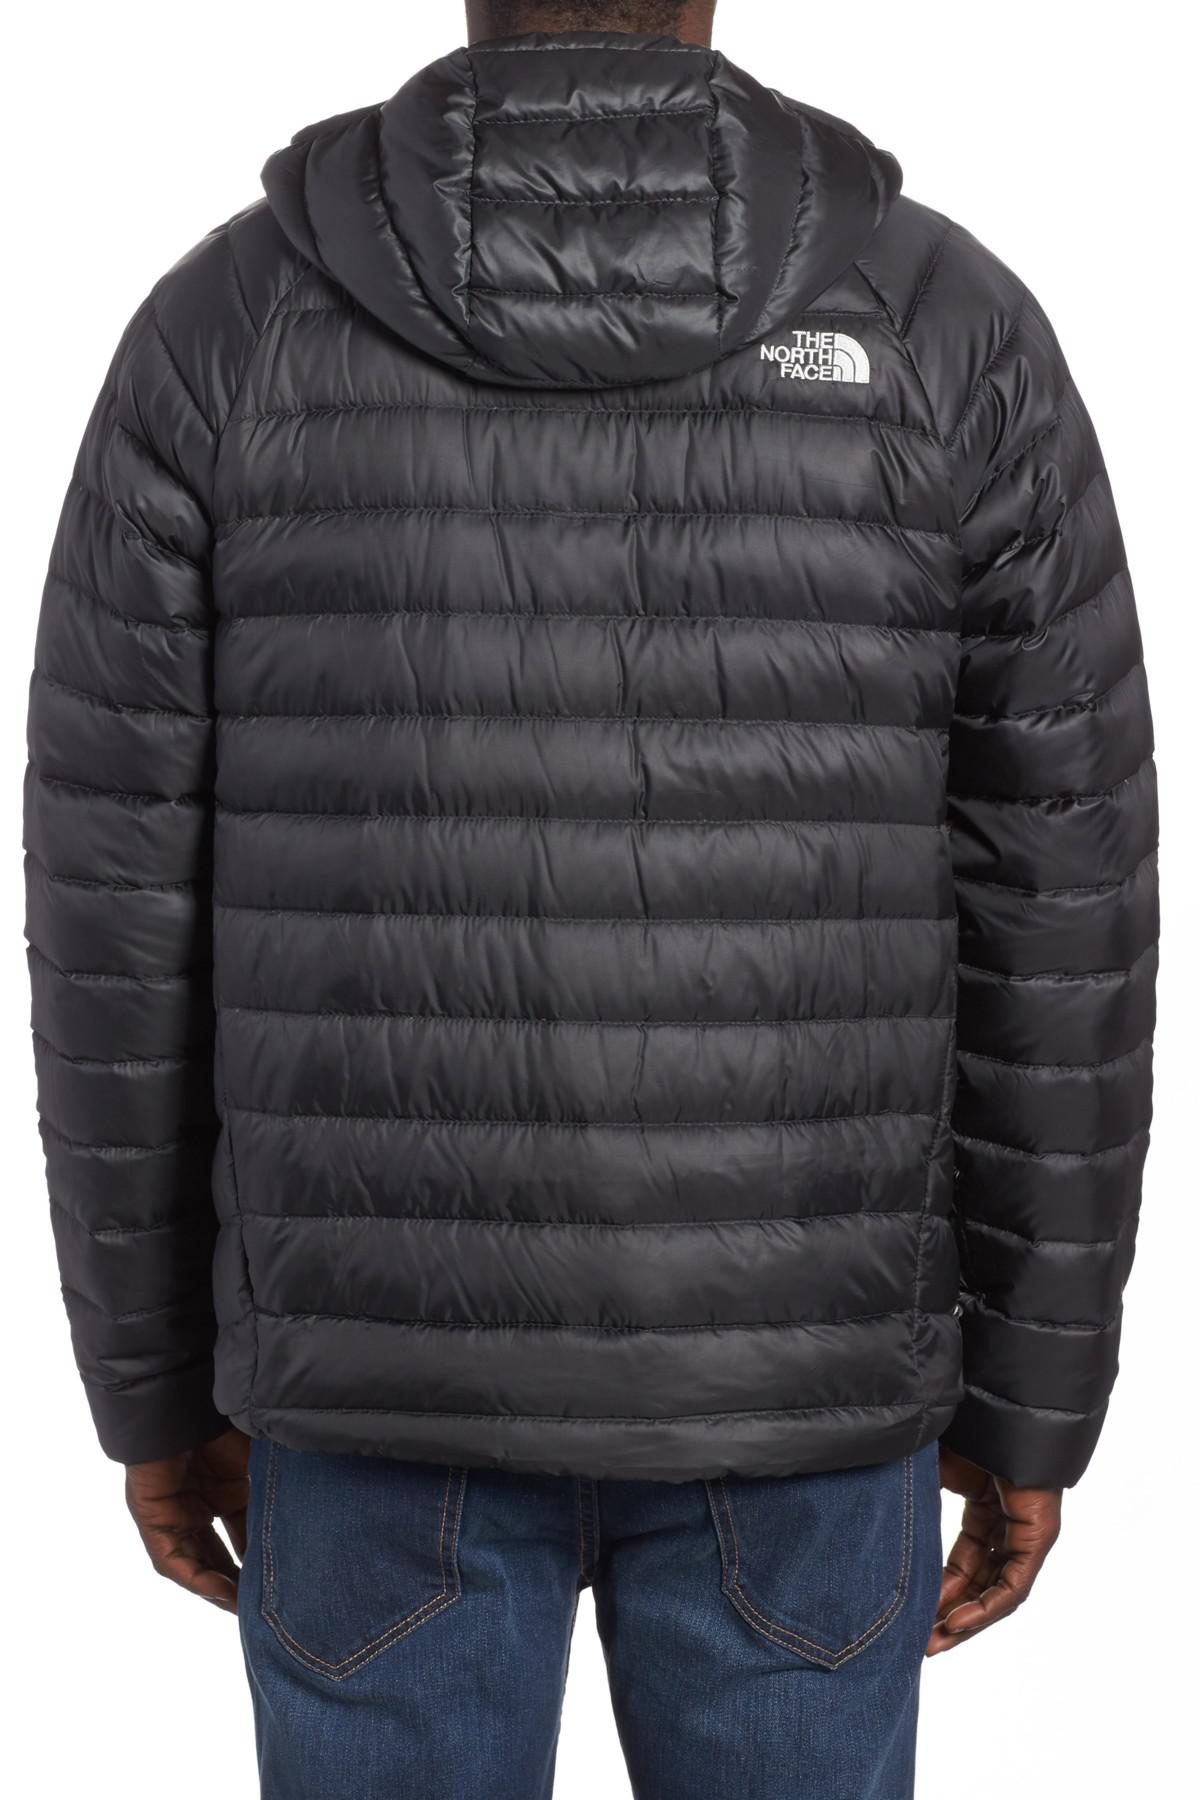 Yde the north face down jacket washing instructions online united arab